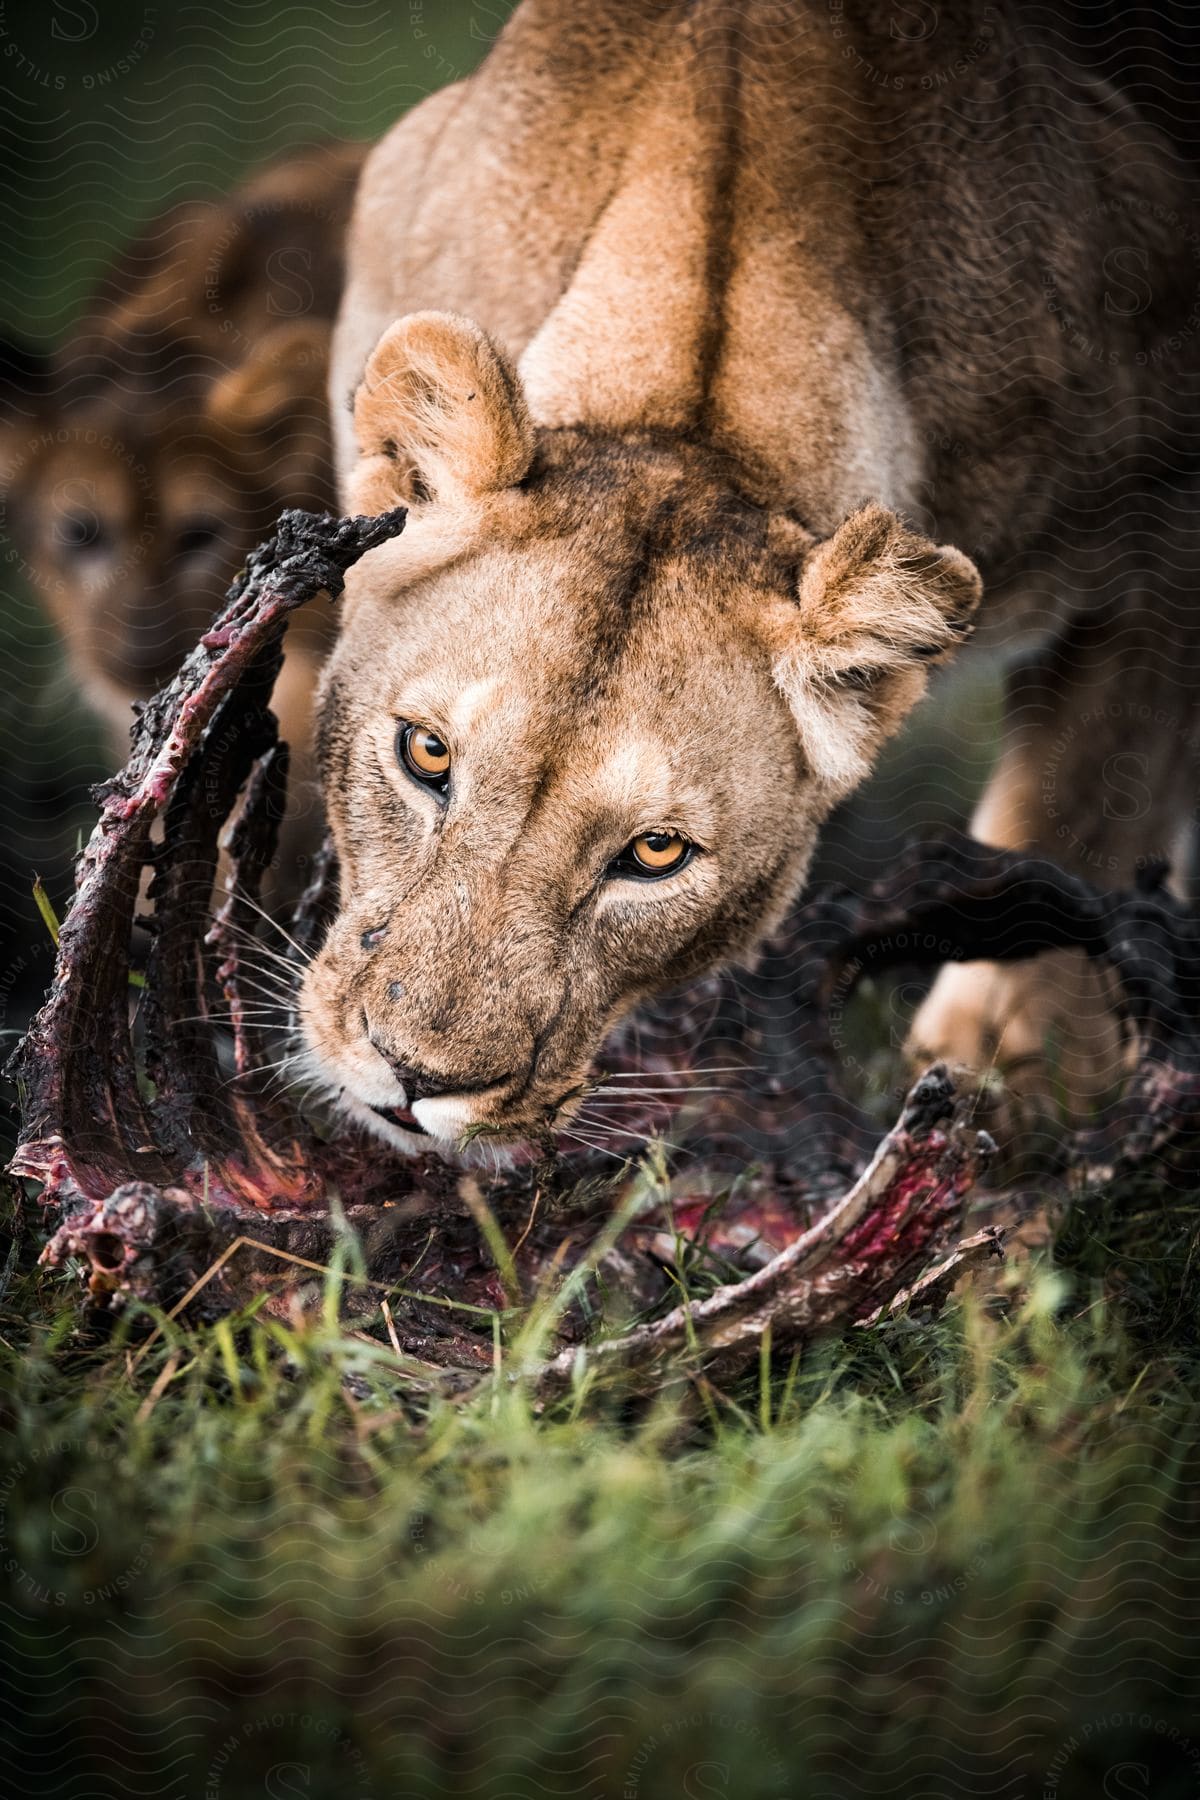 Lioness feeding on a dead animal carcass in the wild in tanzania